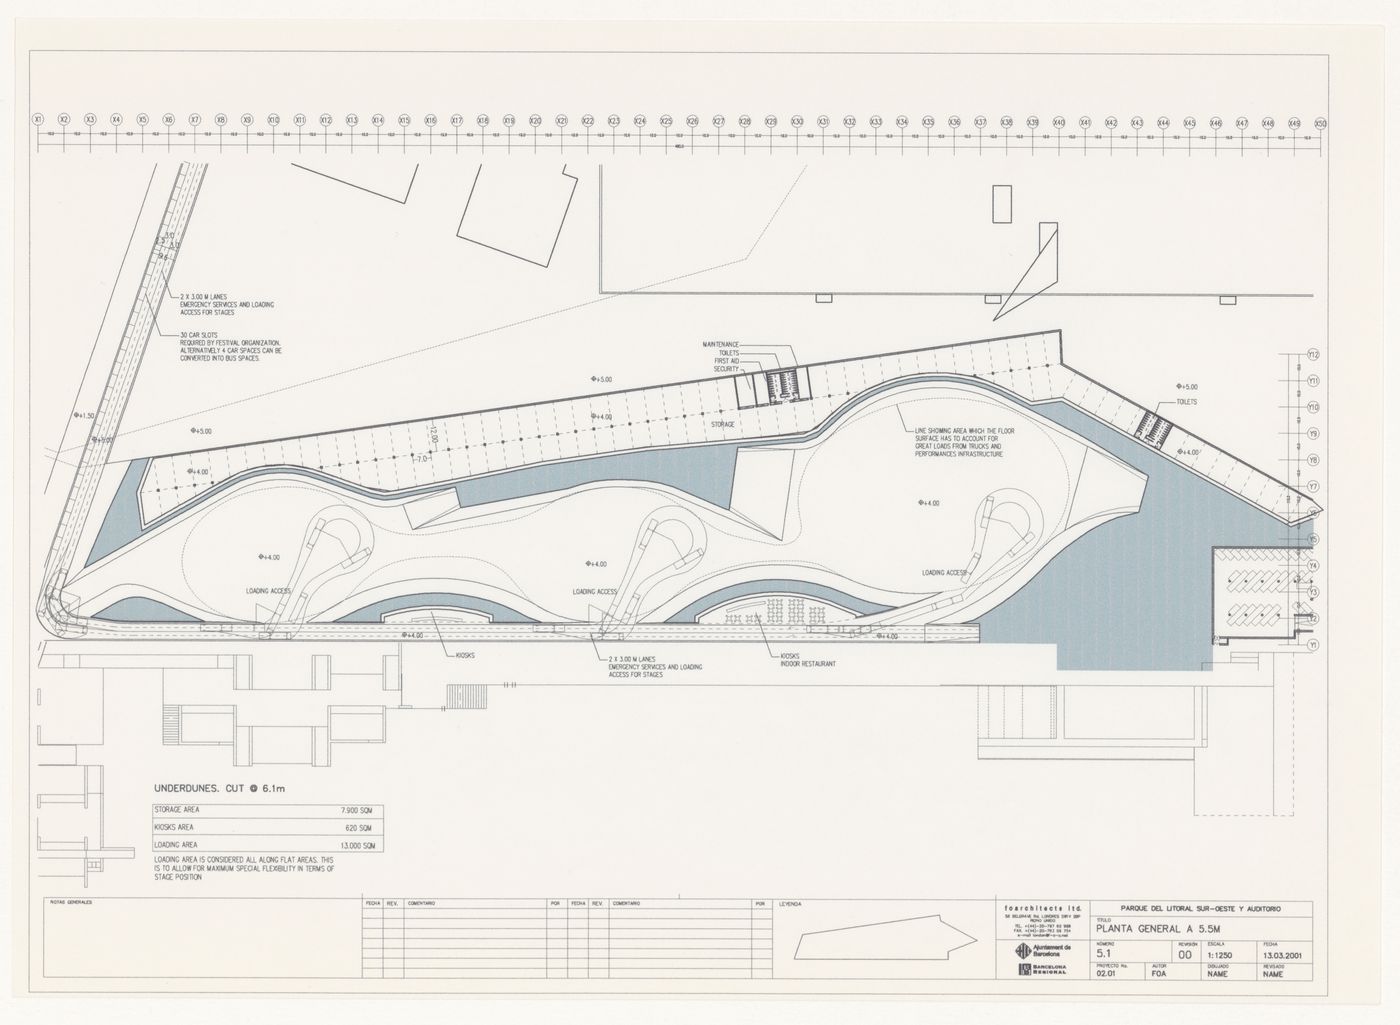 Set of drawings for South East Coastal Park & Auditoriums, Barcelona, Spain